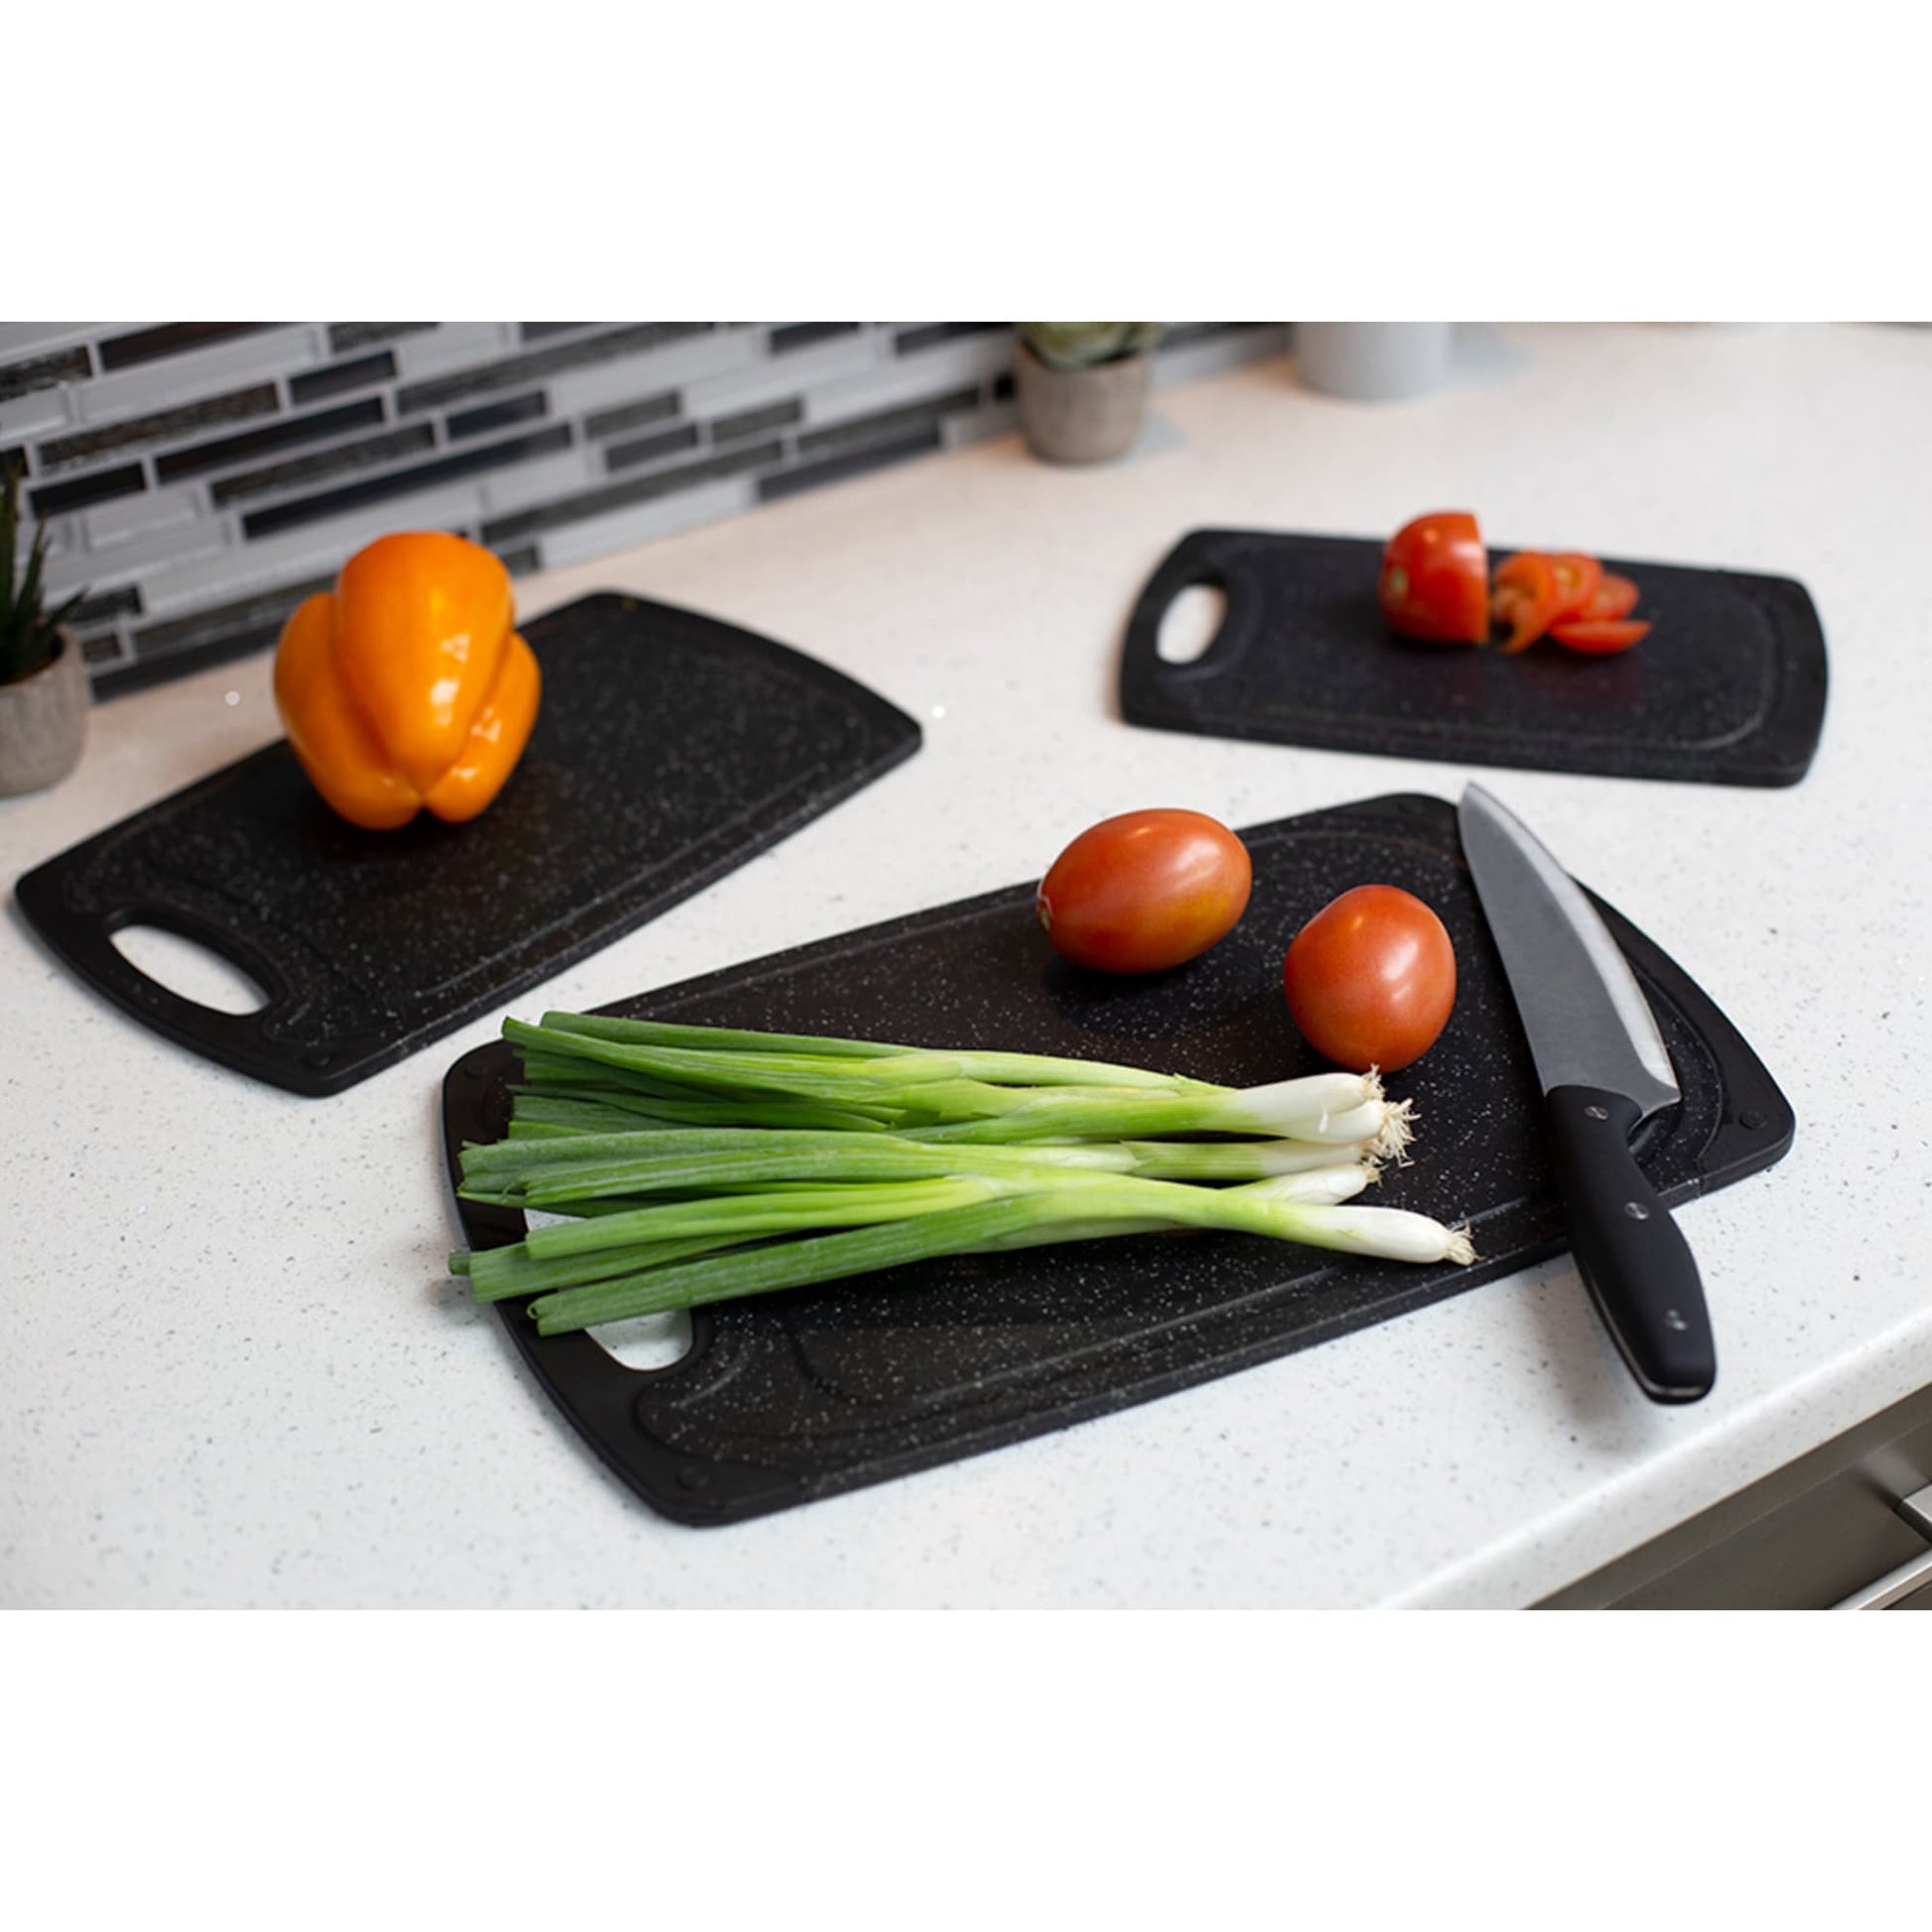 3 Pcs Cutting Board Set, Plastic Doublesided Chopping Board Non-slip  Cutting Mats Cooking Accessories For Meat, Veggies, Fruits[black]